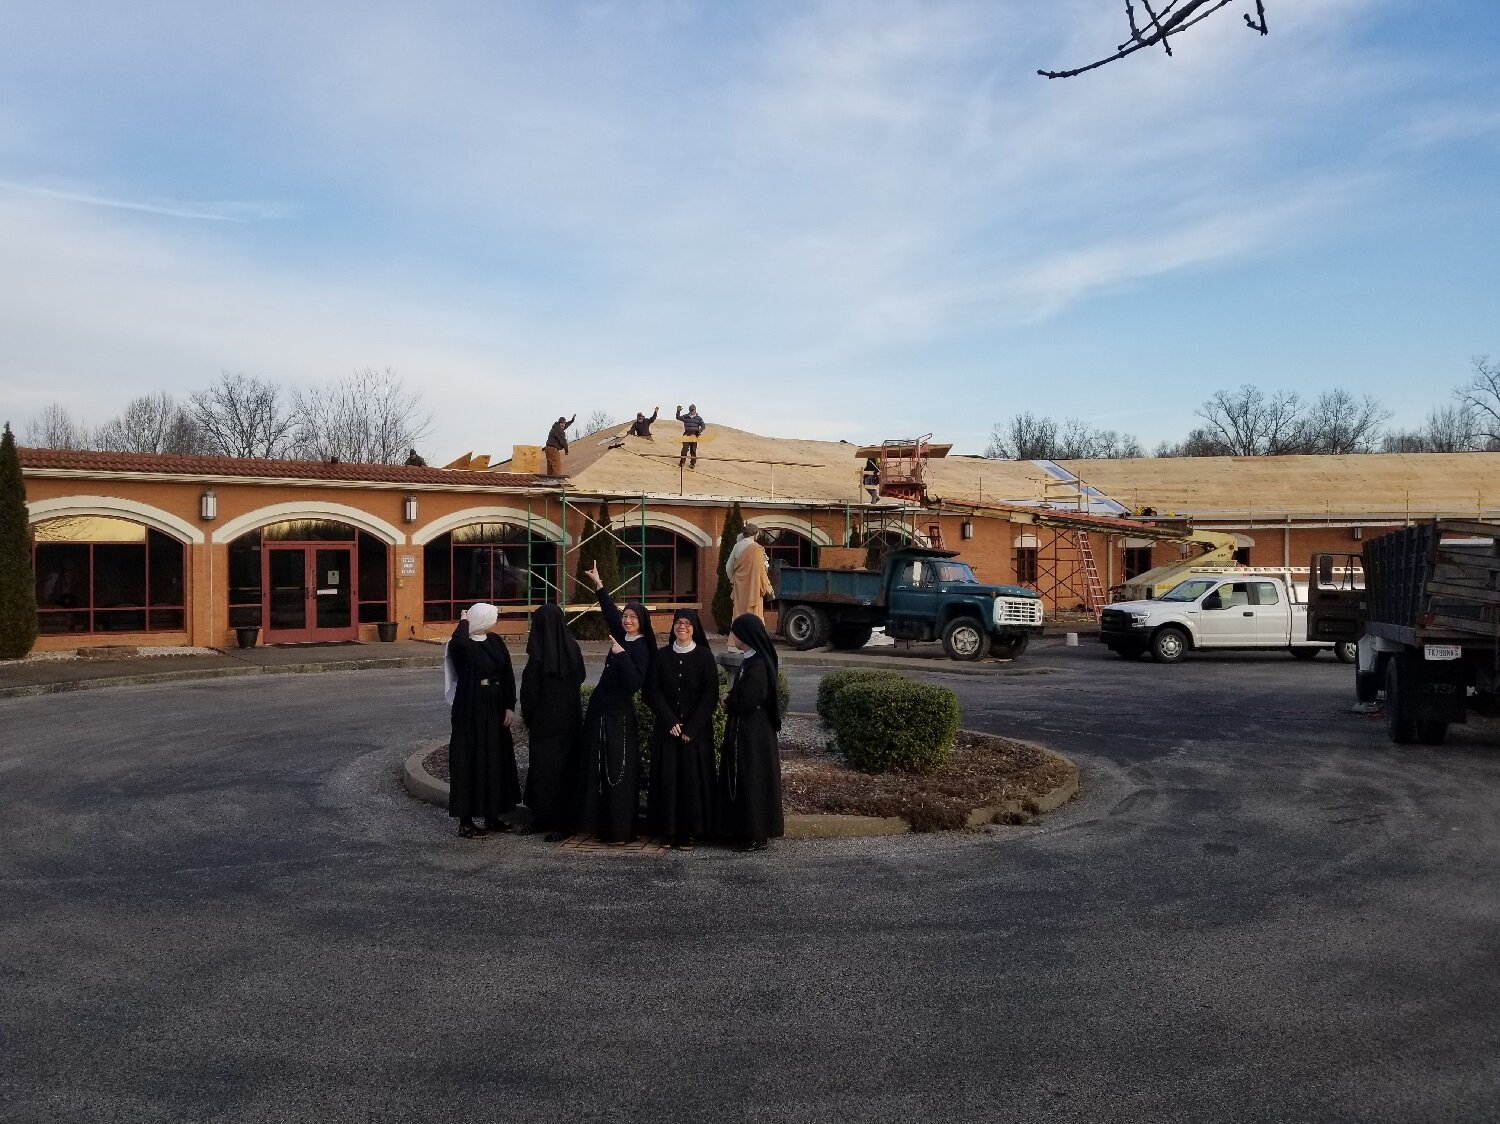  January 14 - Hurray for our Helming Brothers roofing crew! 